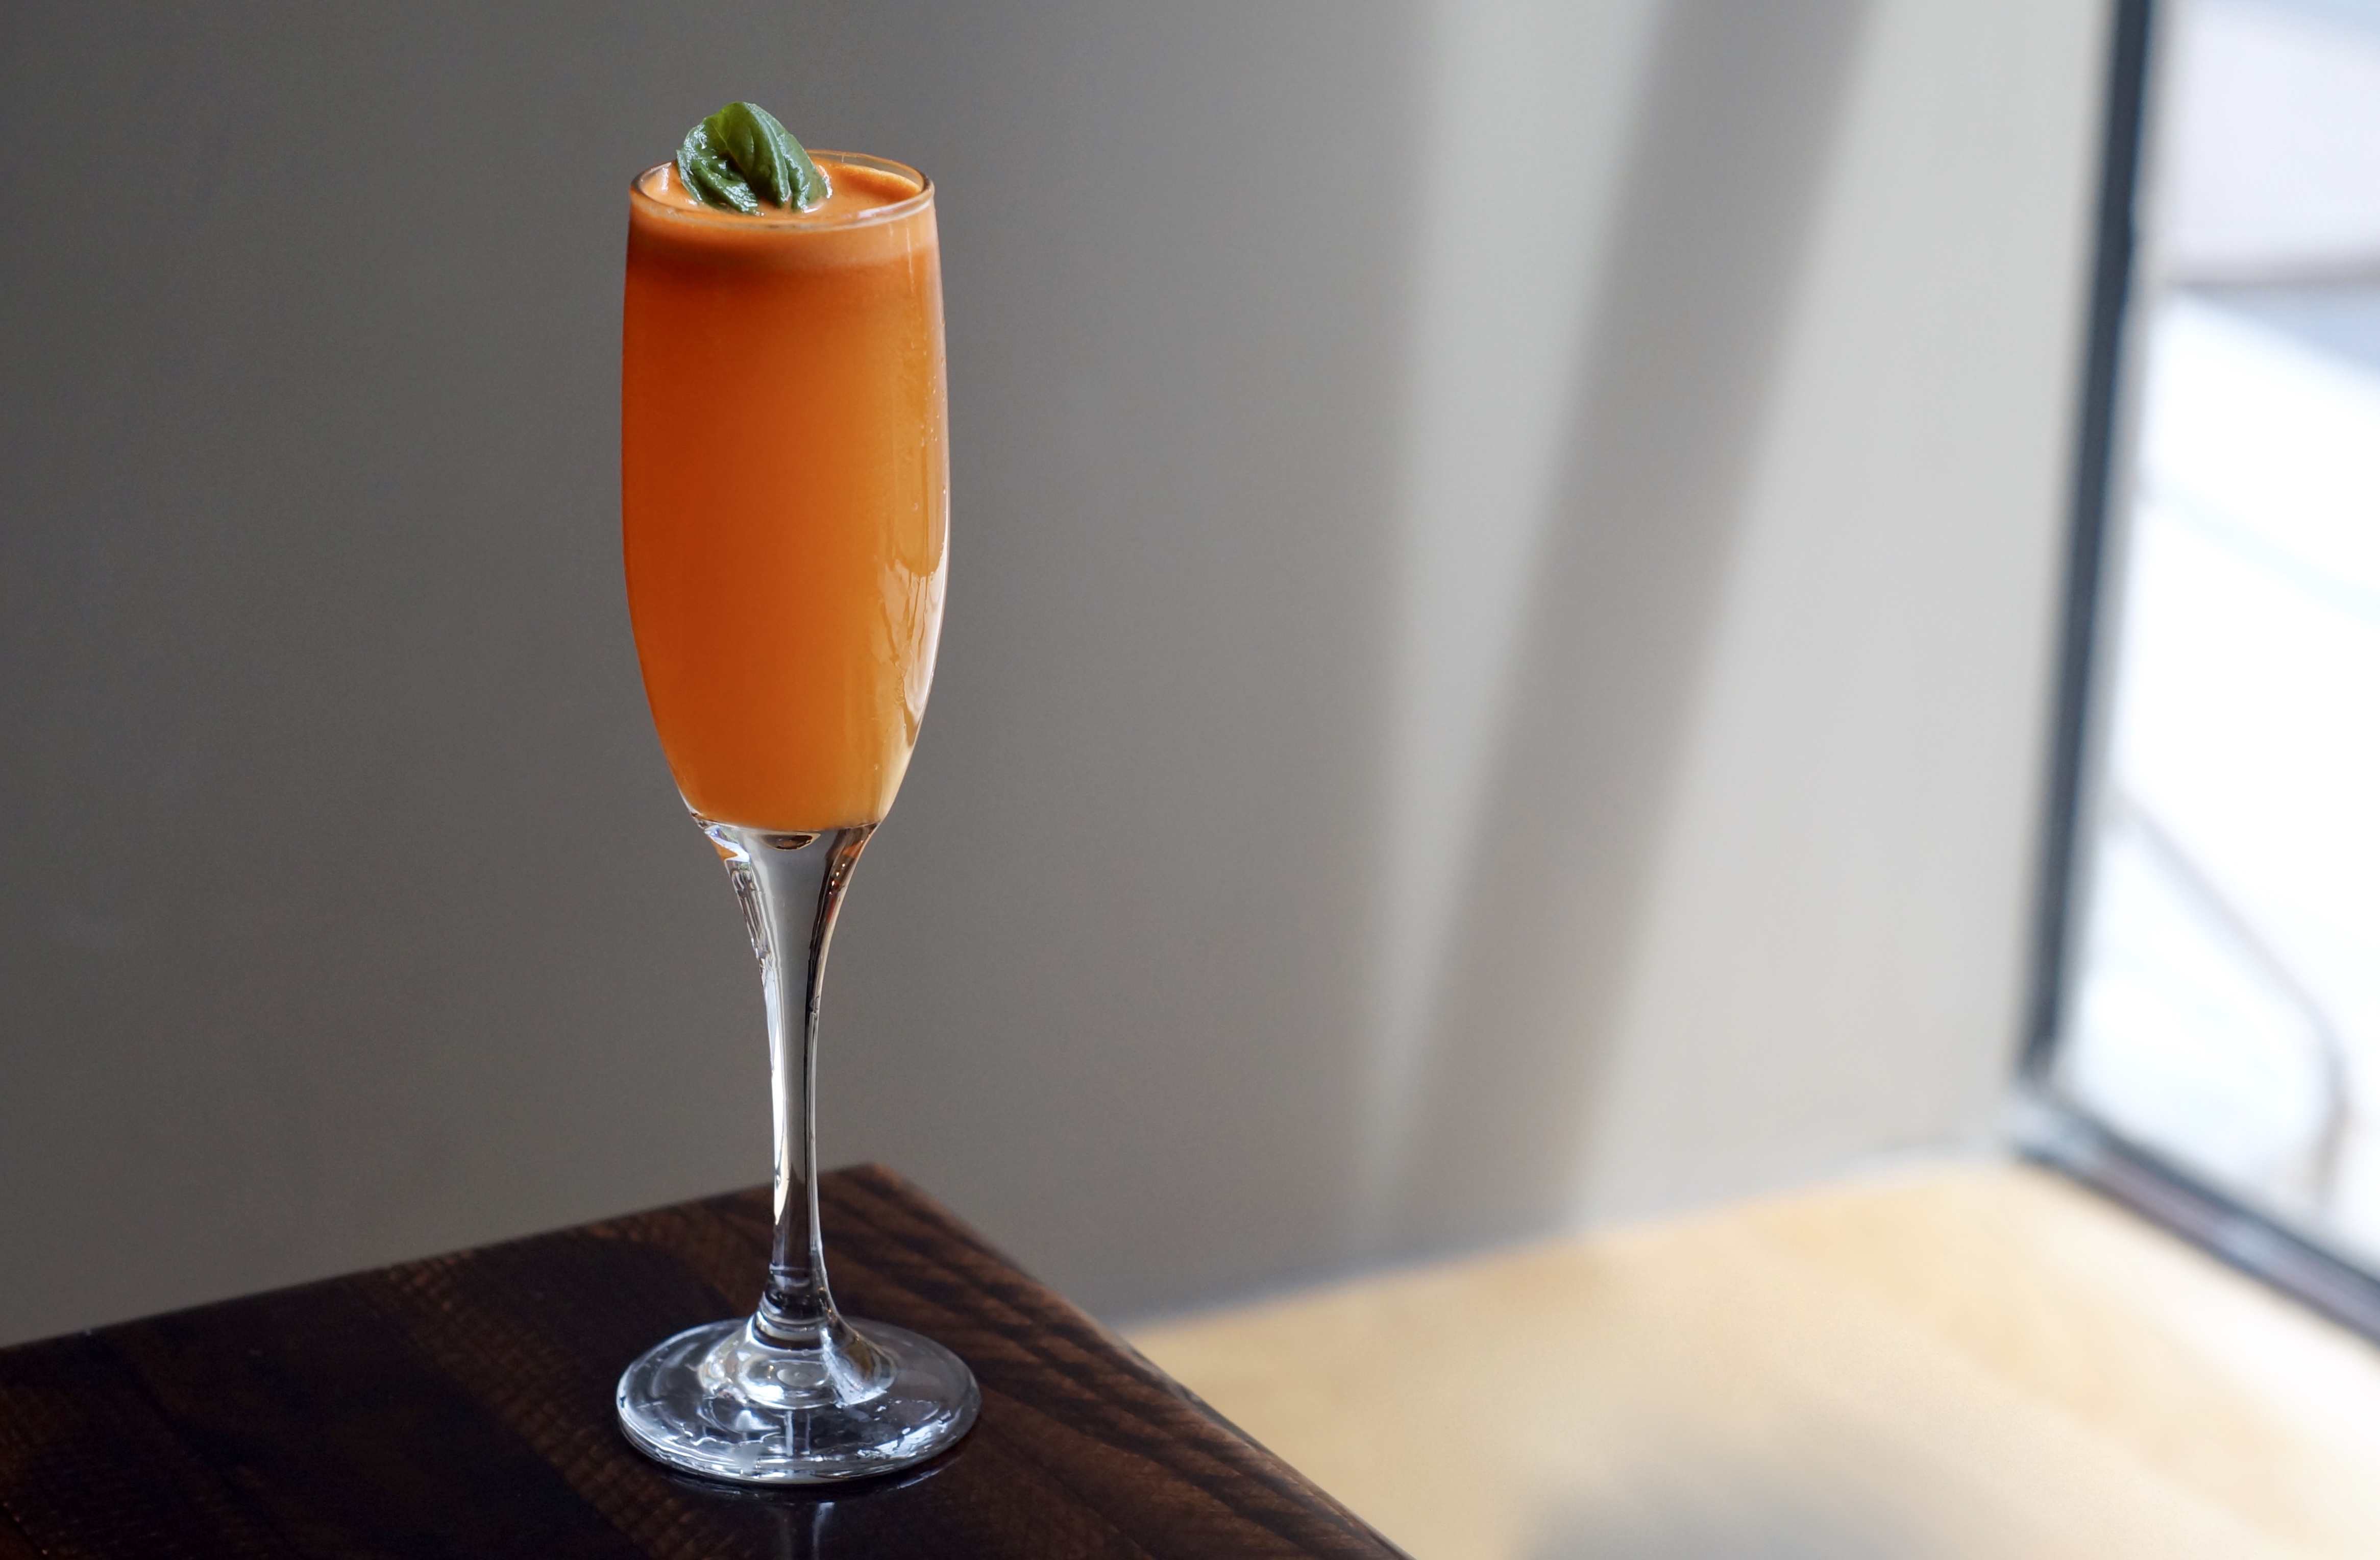 Square 1682 Announces New Lead Bartender and Summer Cocktail Menu